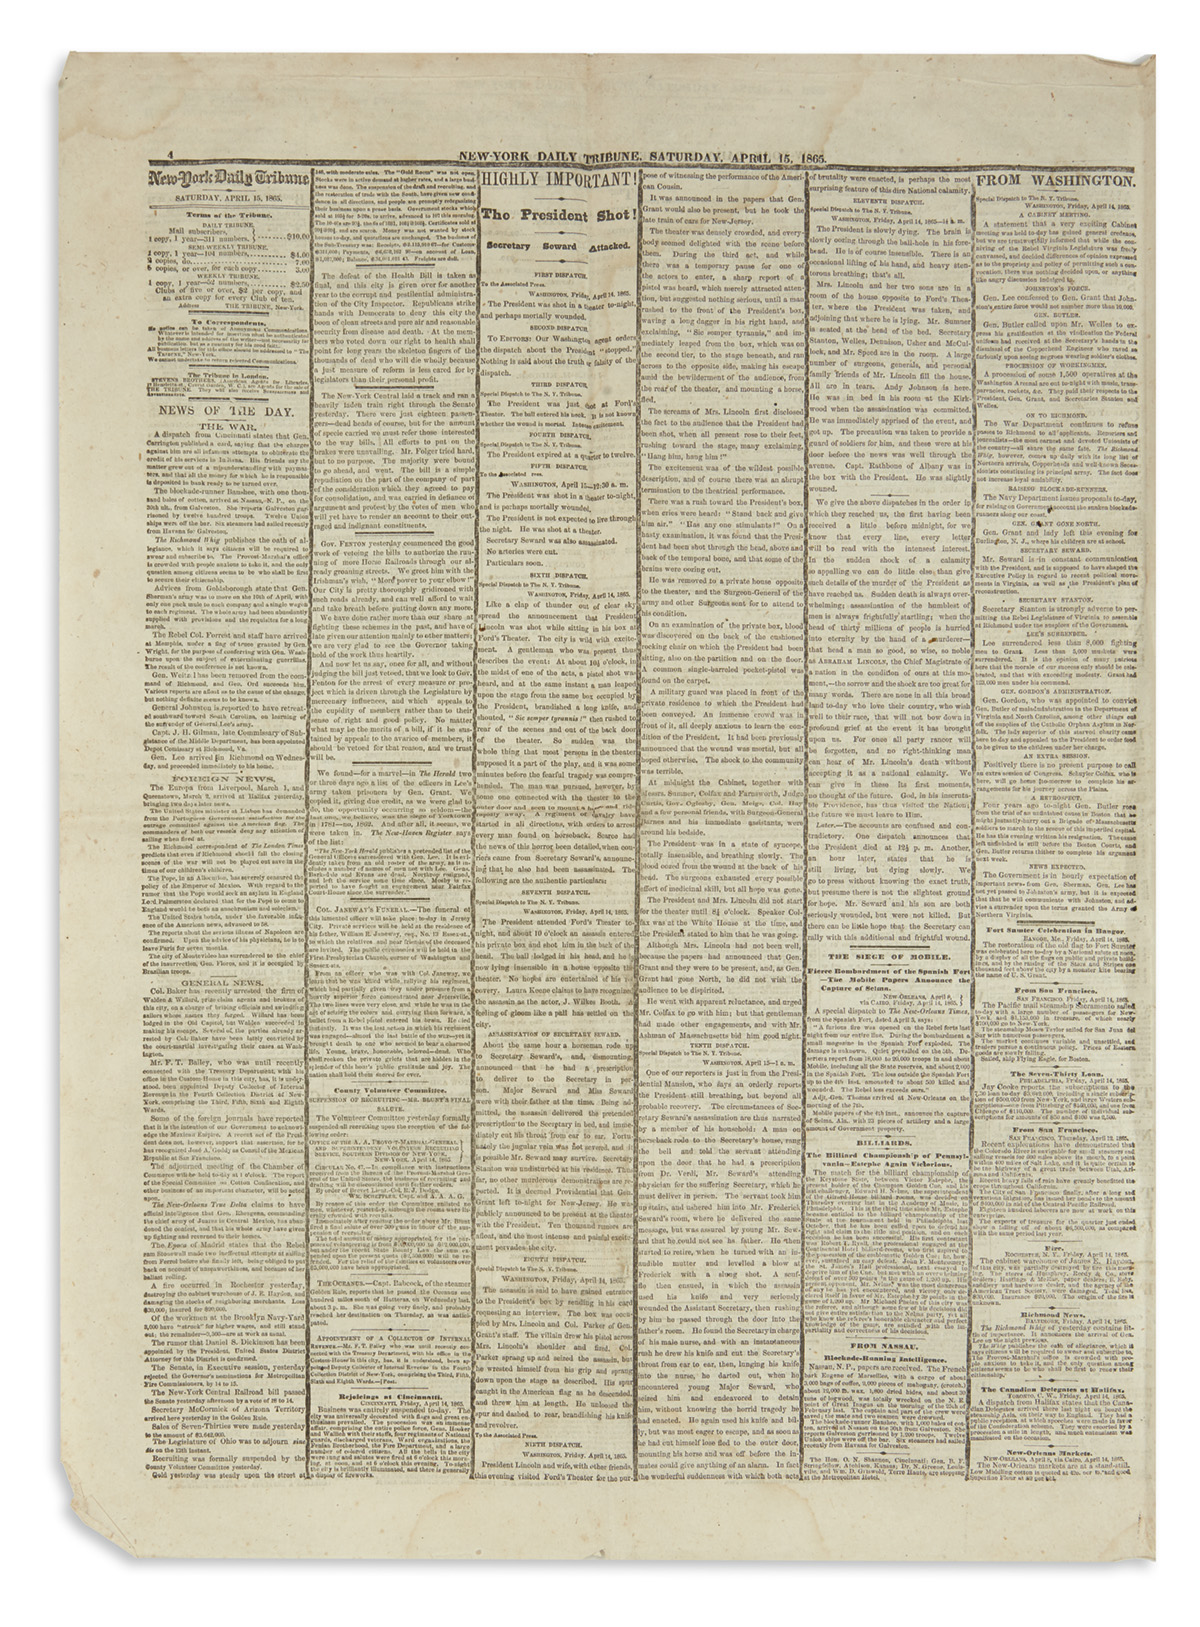 (LINCOLN, ABRAHAM.) Assassination issue of the New-York Tribune.